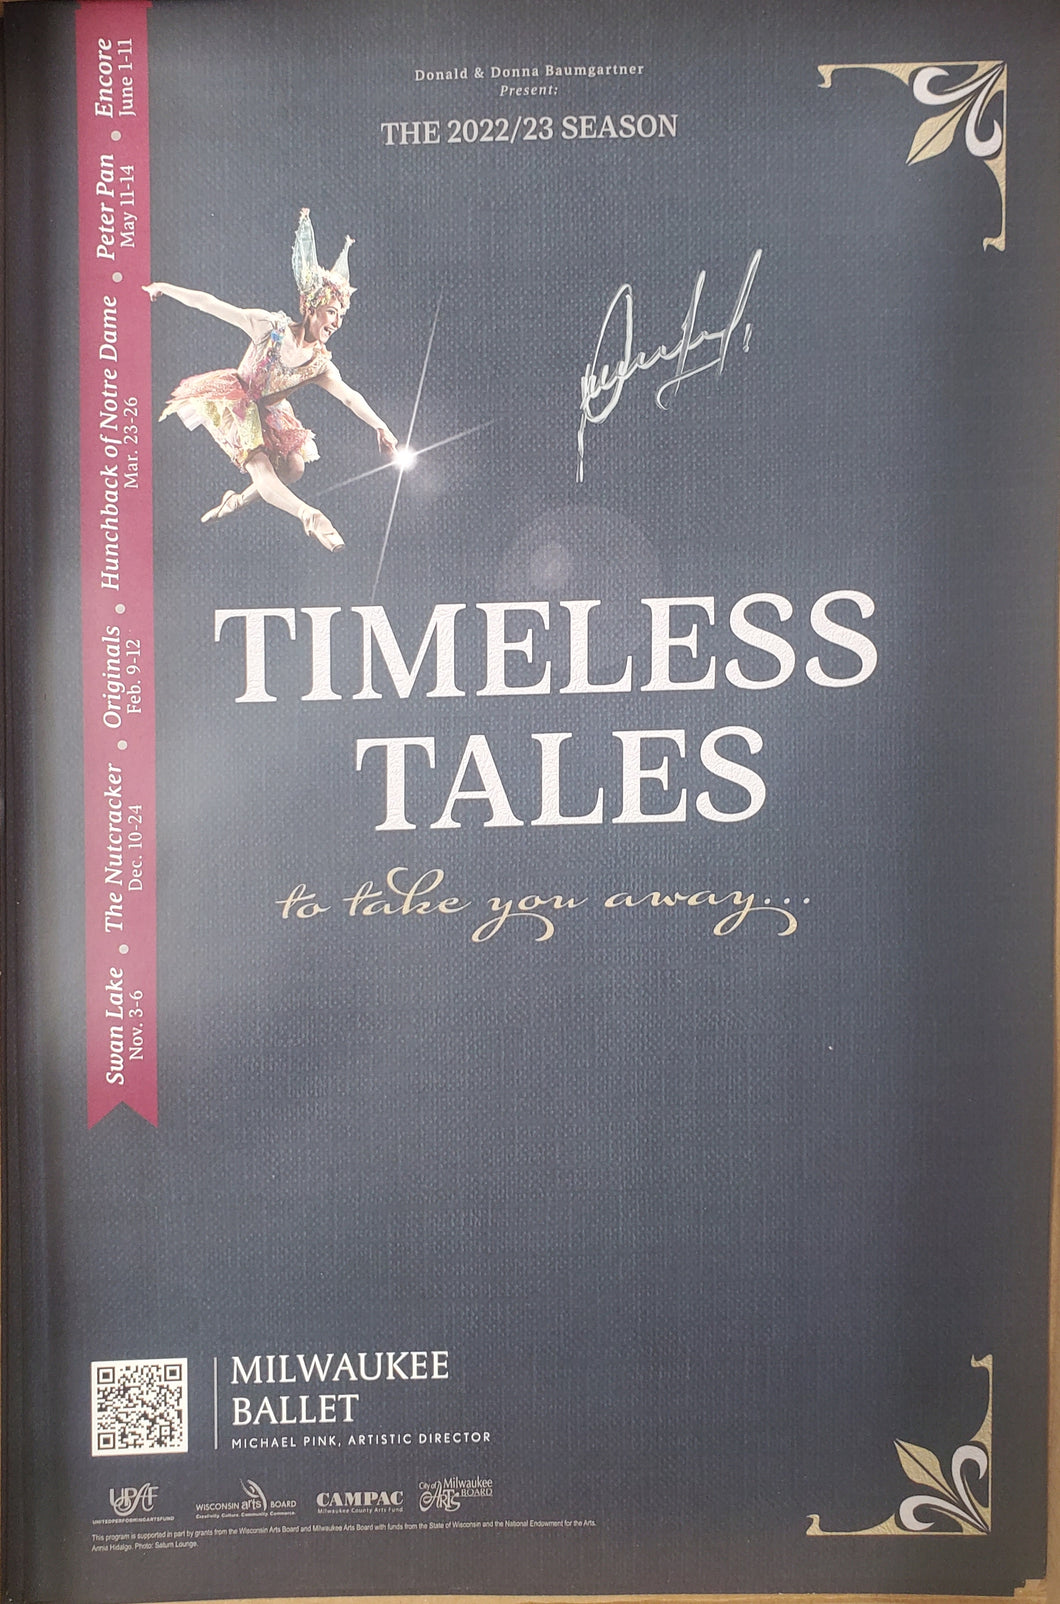 Autographed Poster | 22-23 Season of Timeless Tales